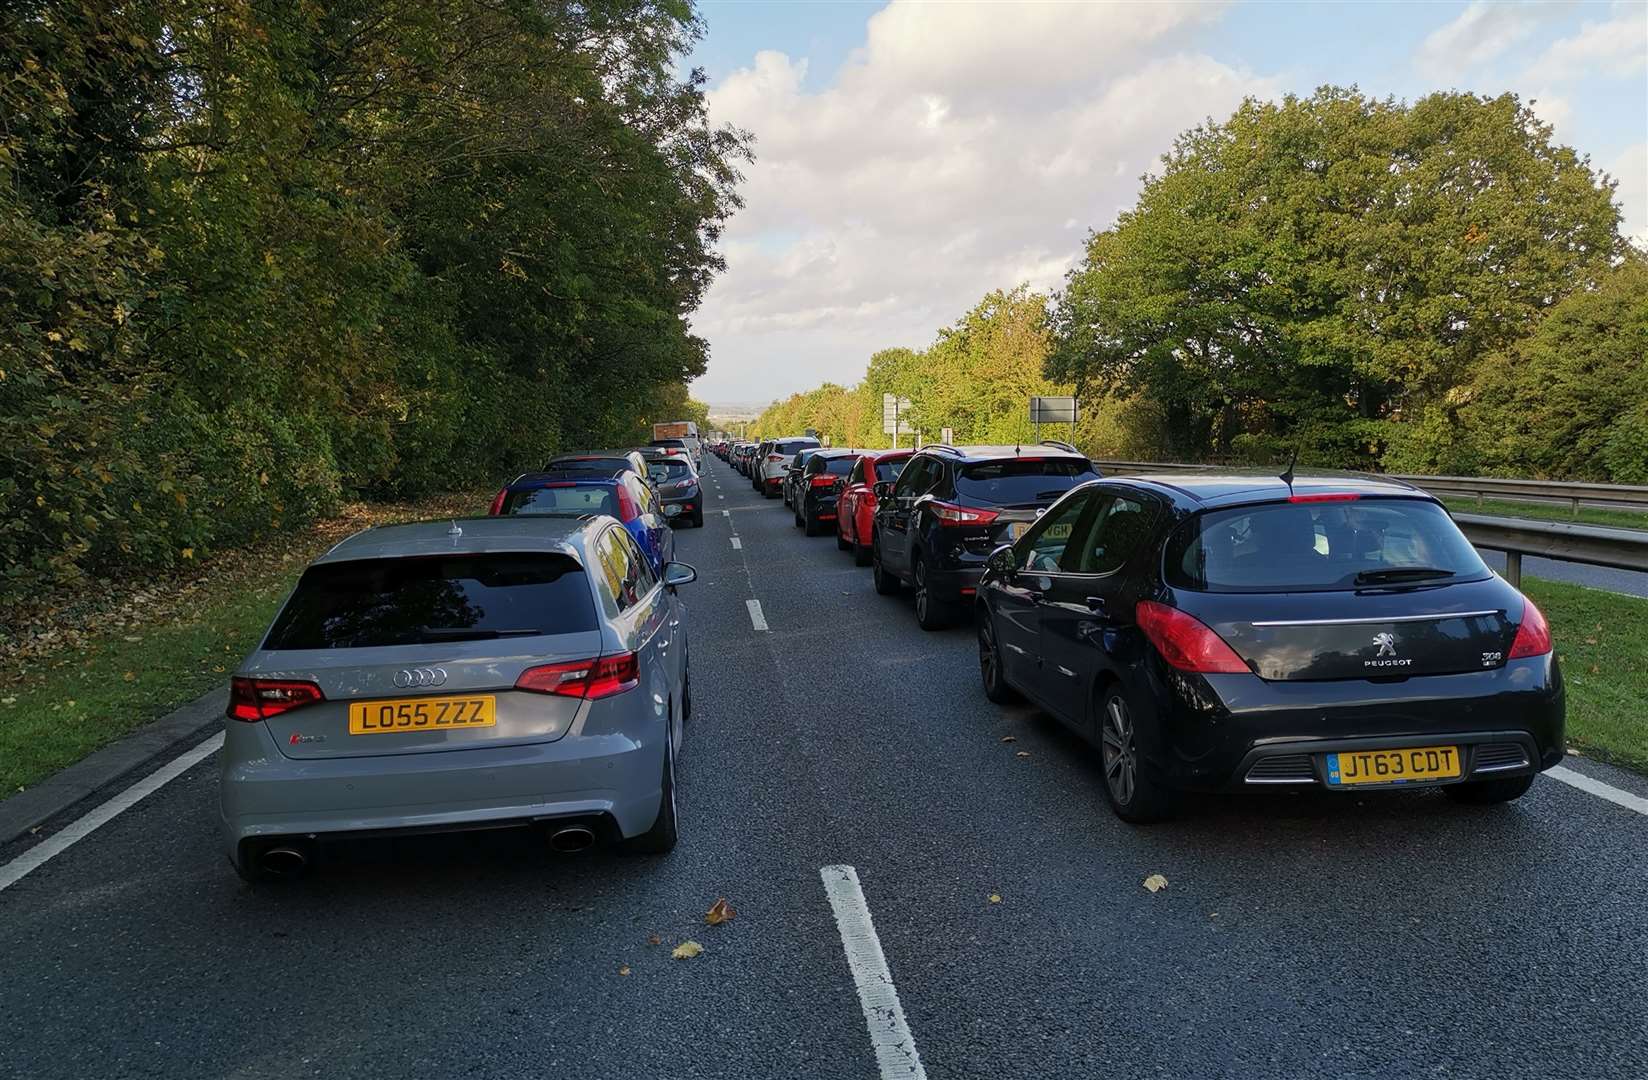 Traffic queues are building on Hoath Way